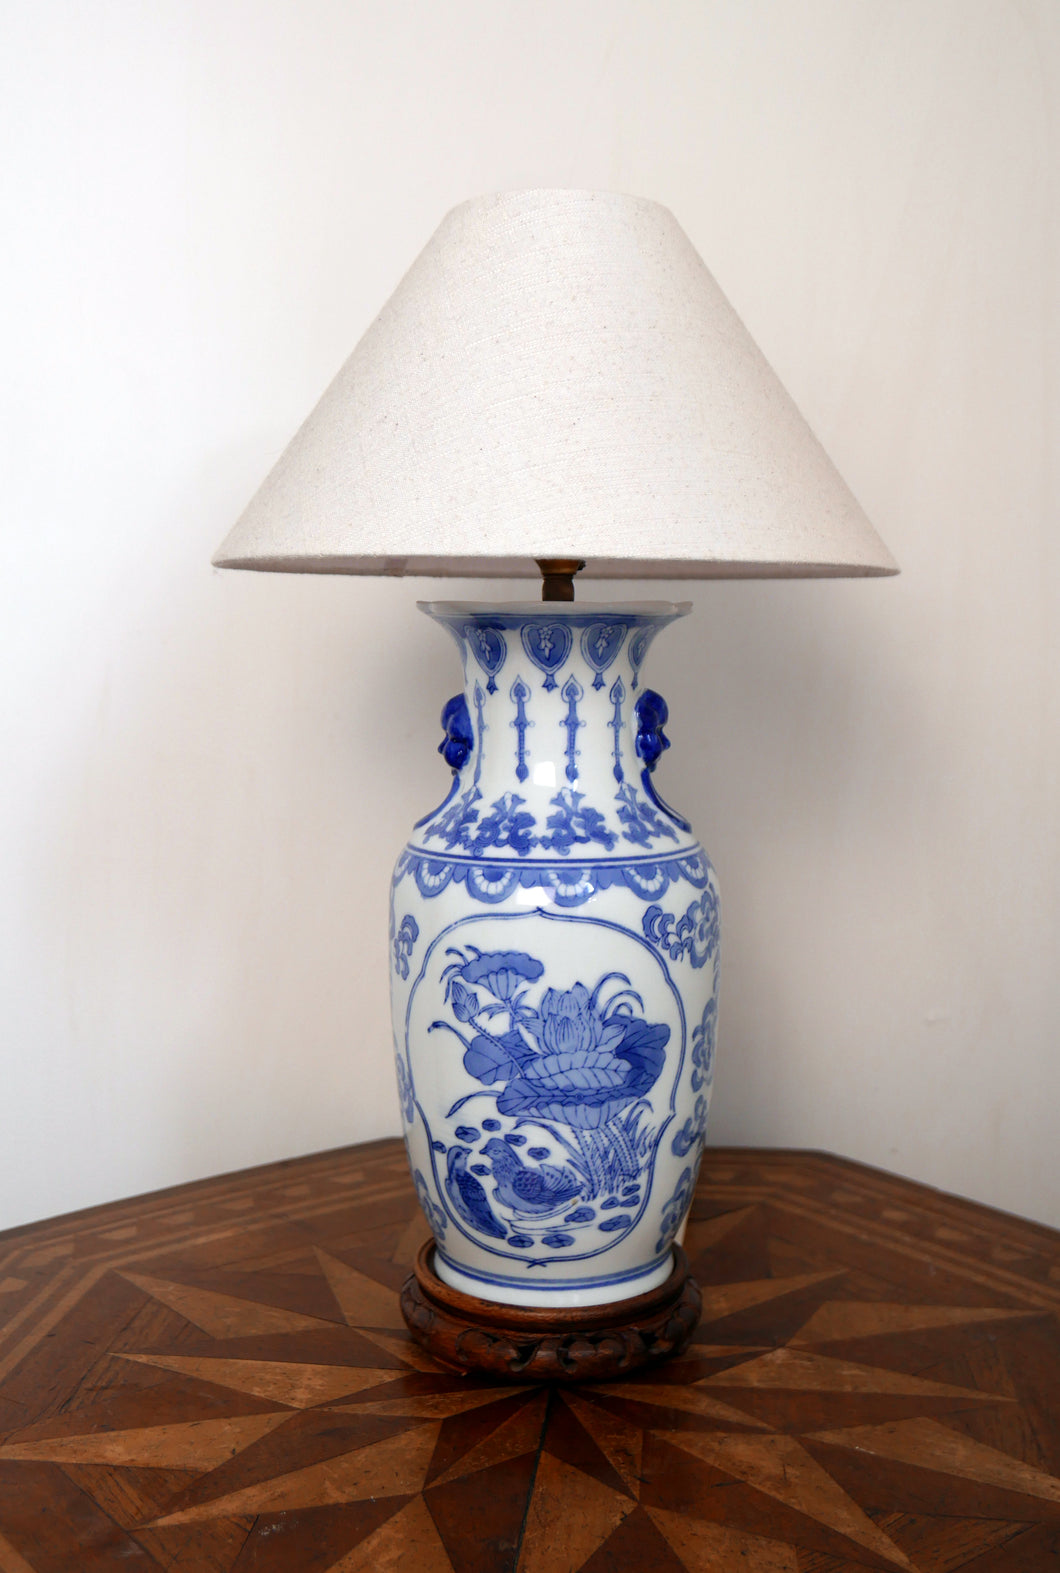 A Blue And White Porcelain Chinese Table Lamp